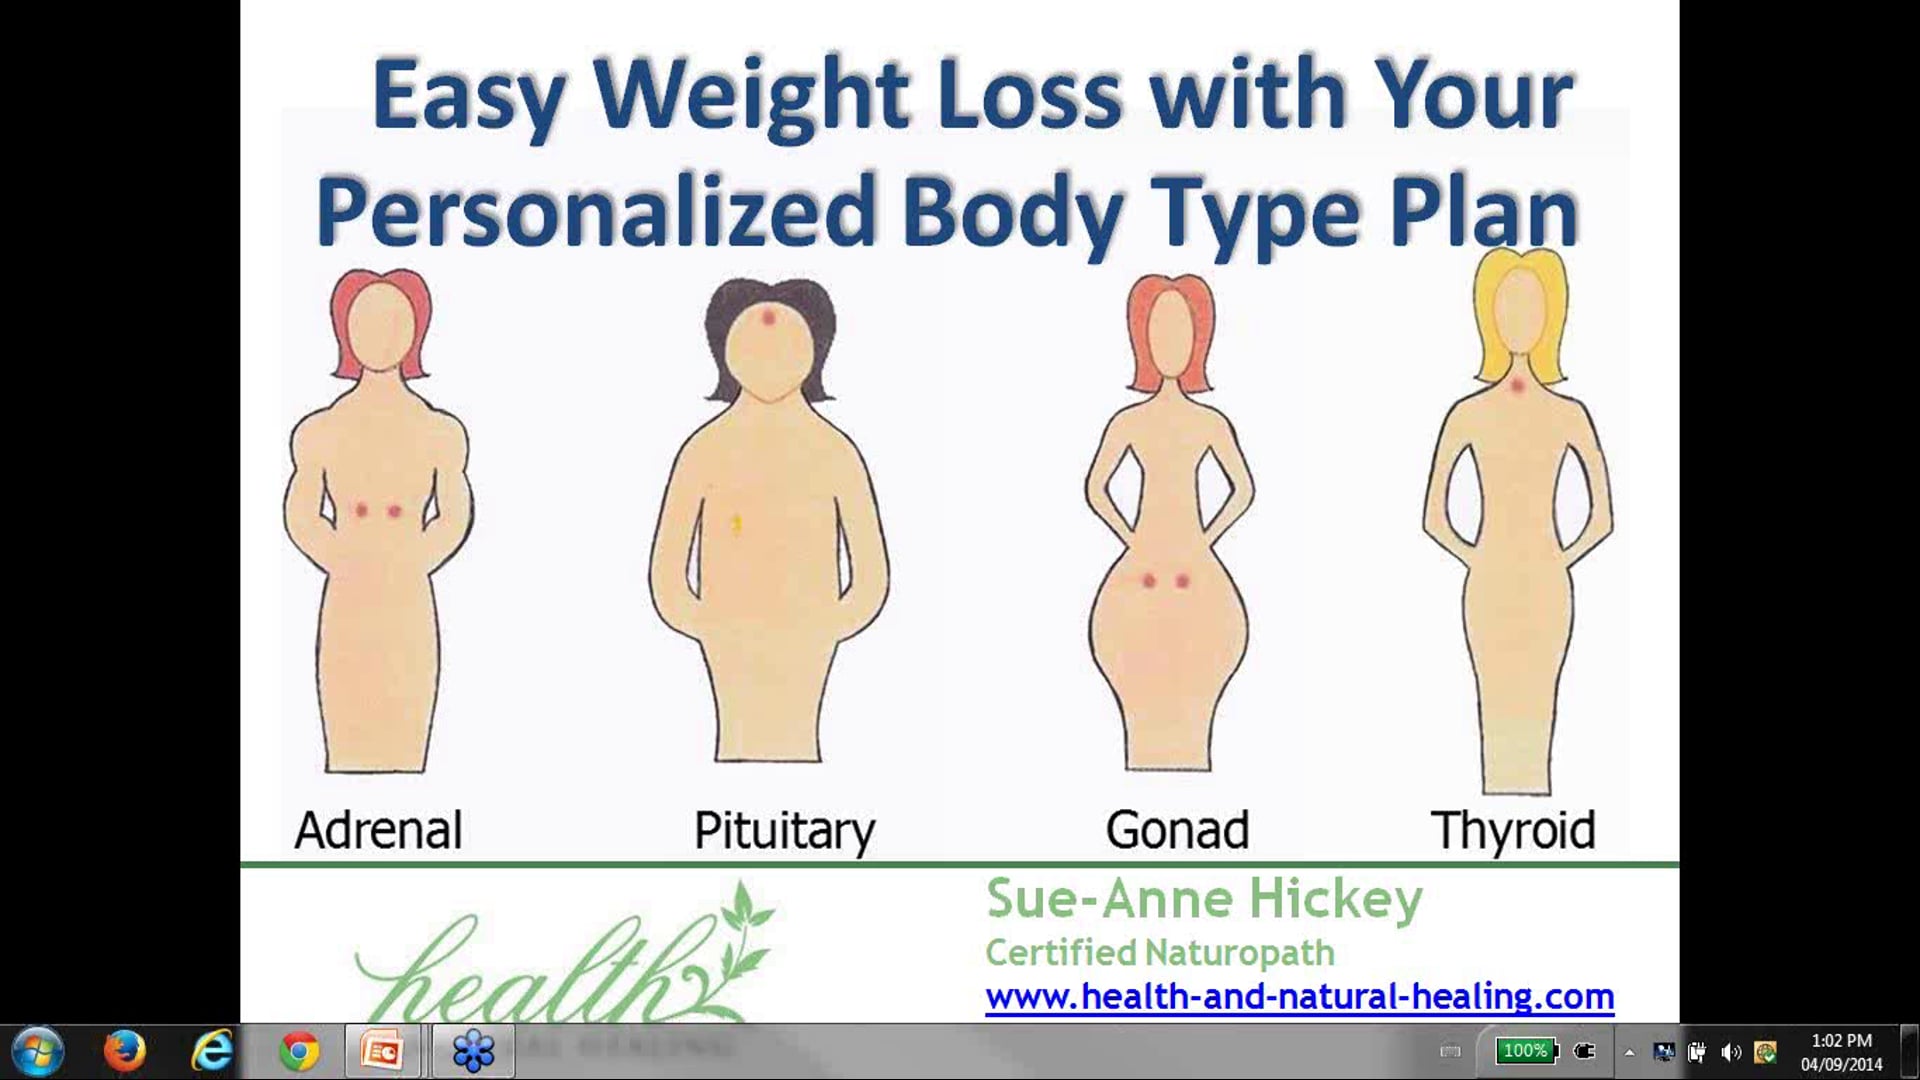 2014-09-04 13.02 Easy Weight Loss with Your Personalized Body Type Plan